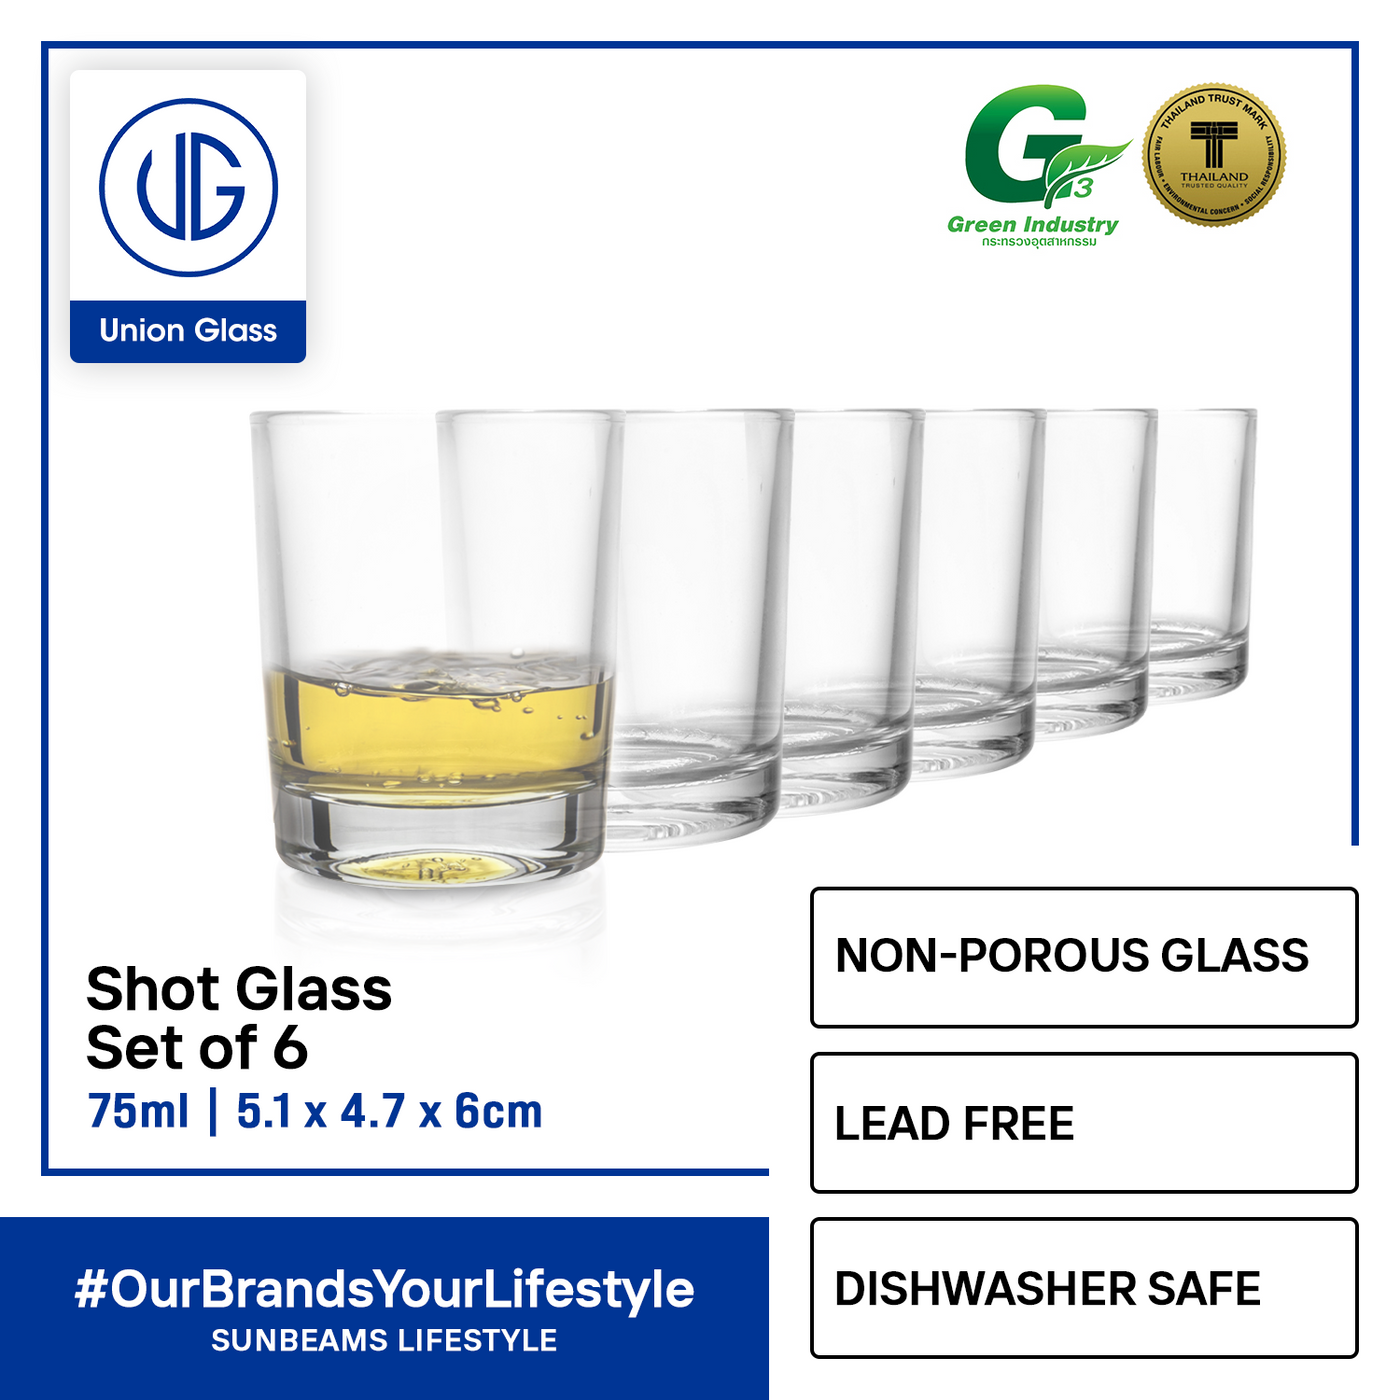 UNION GLASS Thailand Premium Clear Glass Shot Glass 75ml | 2.5oz Set of 6 Amazing Gift Idea For Any Occasion!